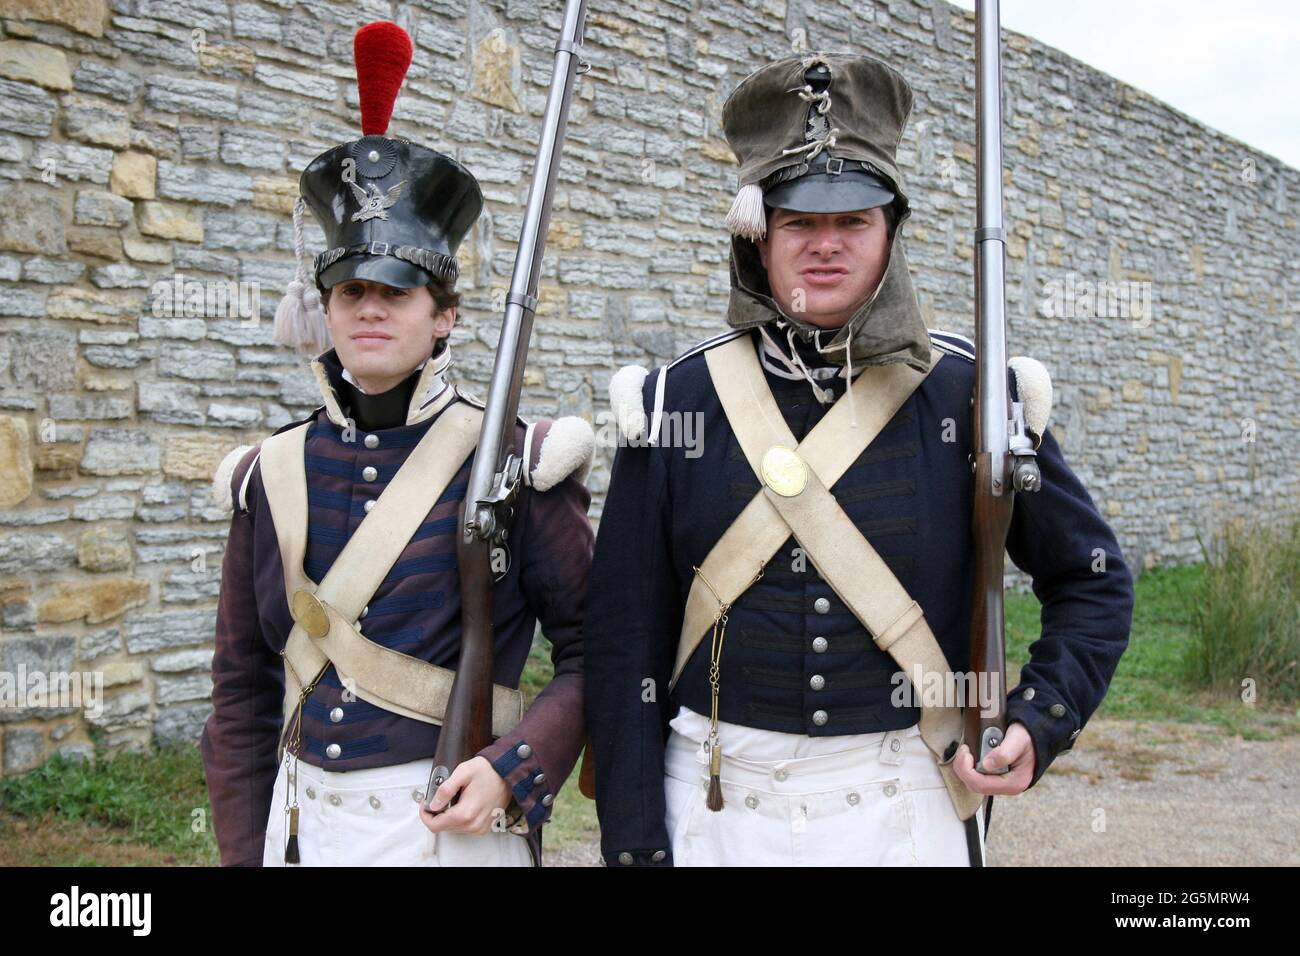 Military reenactors dressed in 1820s uniforms as soldiers of the 5th Infantry Regiment at United States Army outpost of Fort Snelling, Minnesota Stock Photo